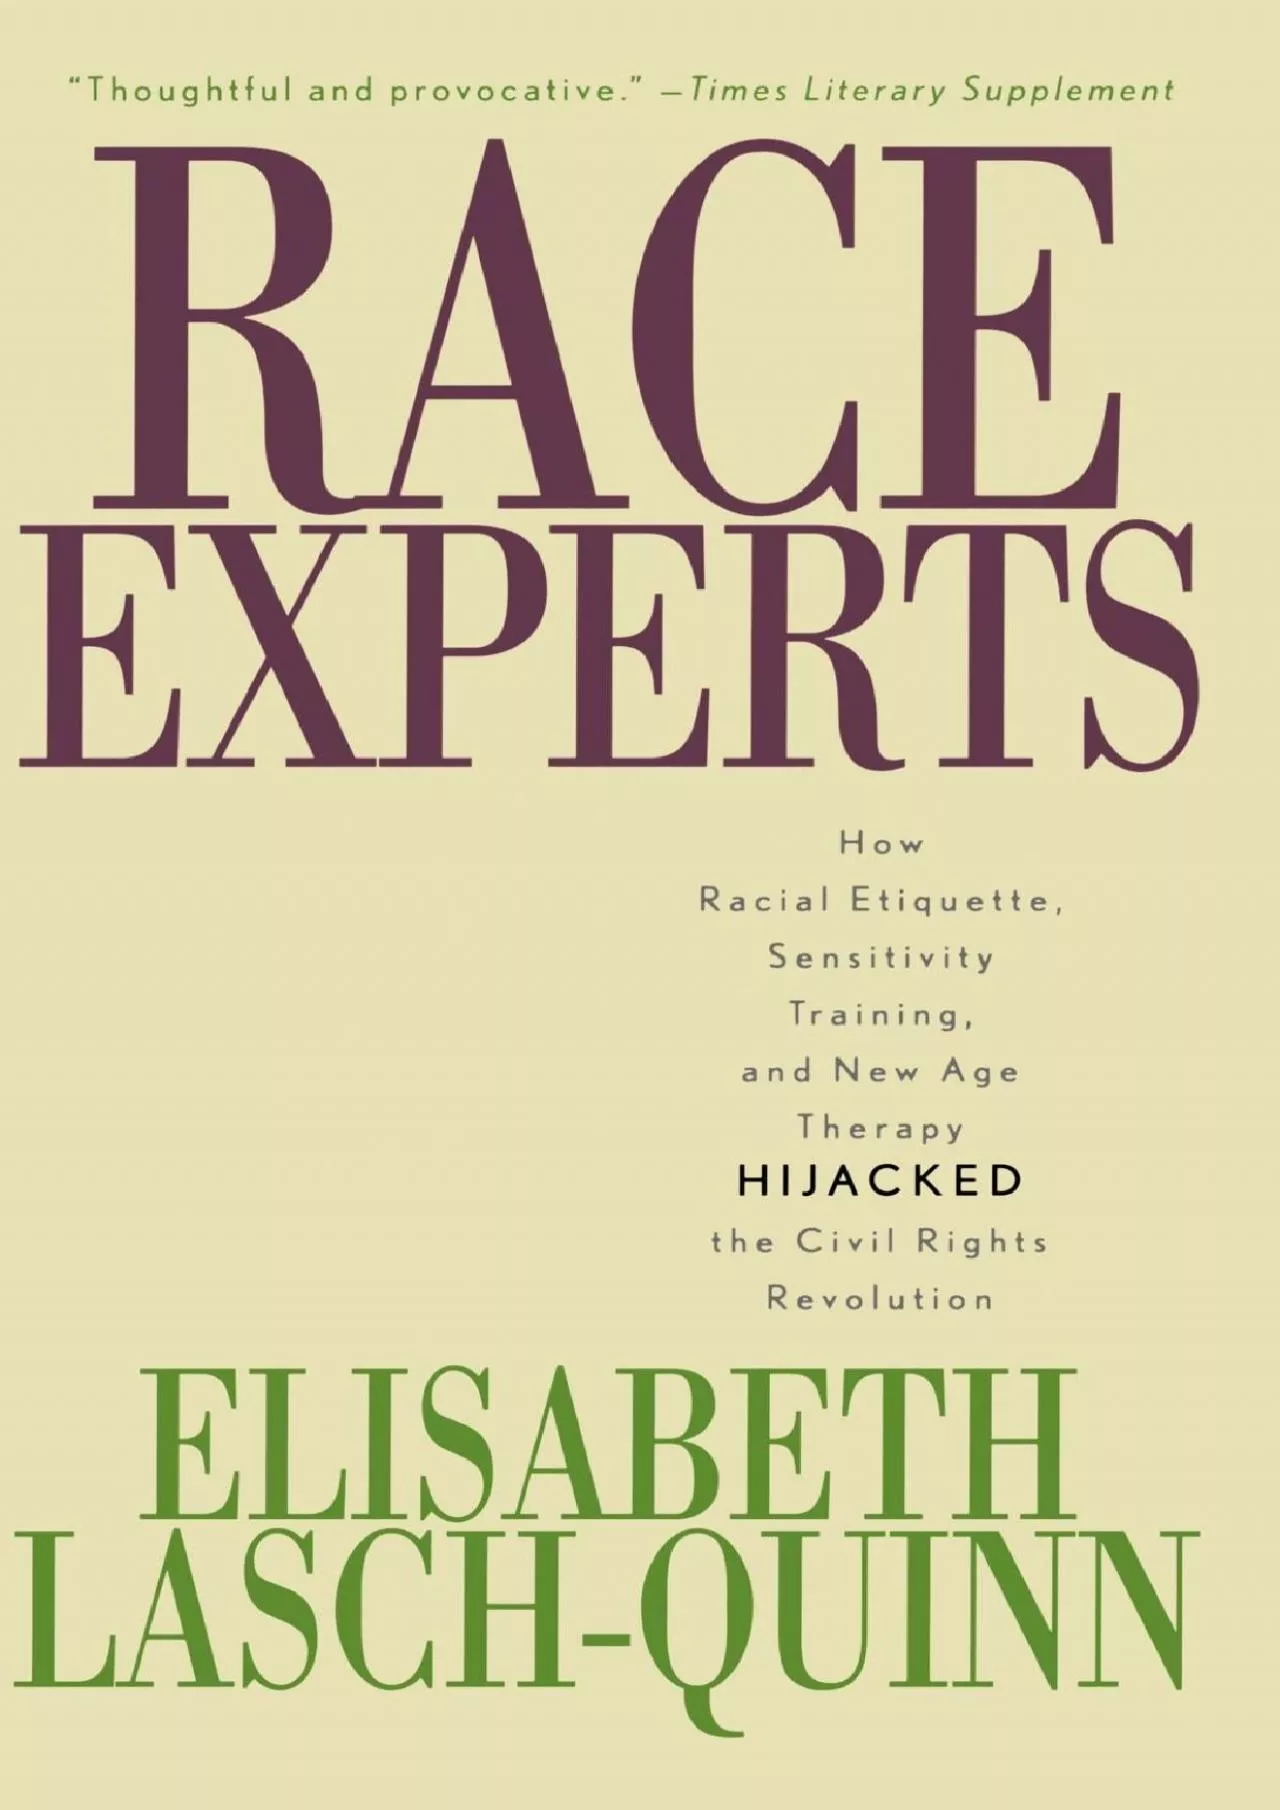 (BOOK)-Race Experts: How Racial Etiquette, Sensitivity Training, and New Age Therapy Hijacked